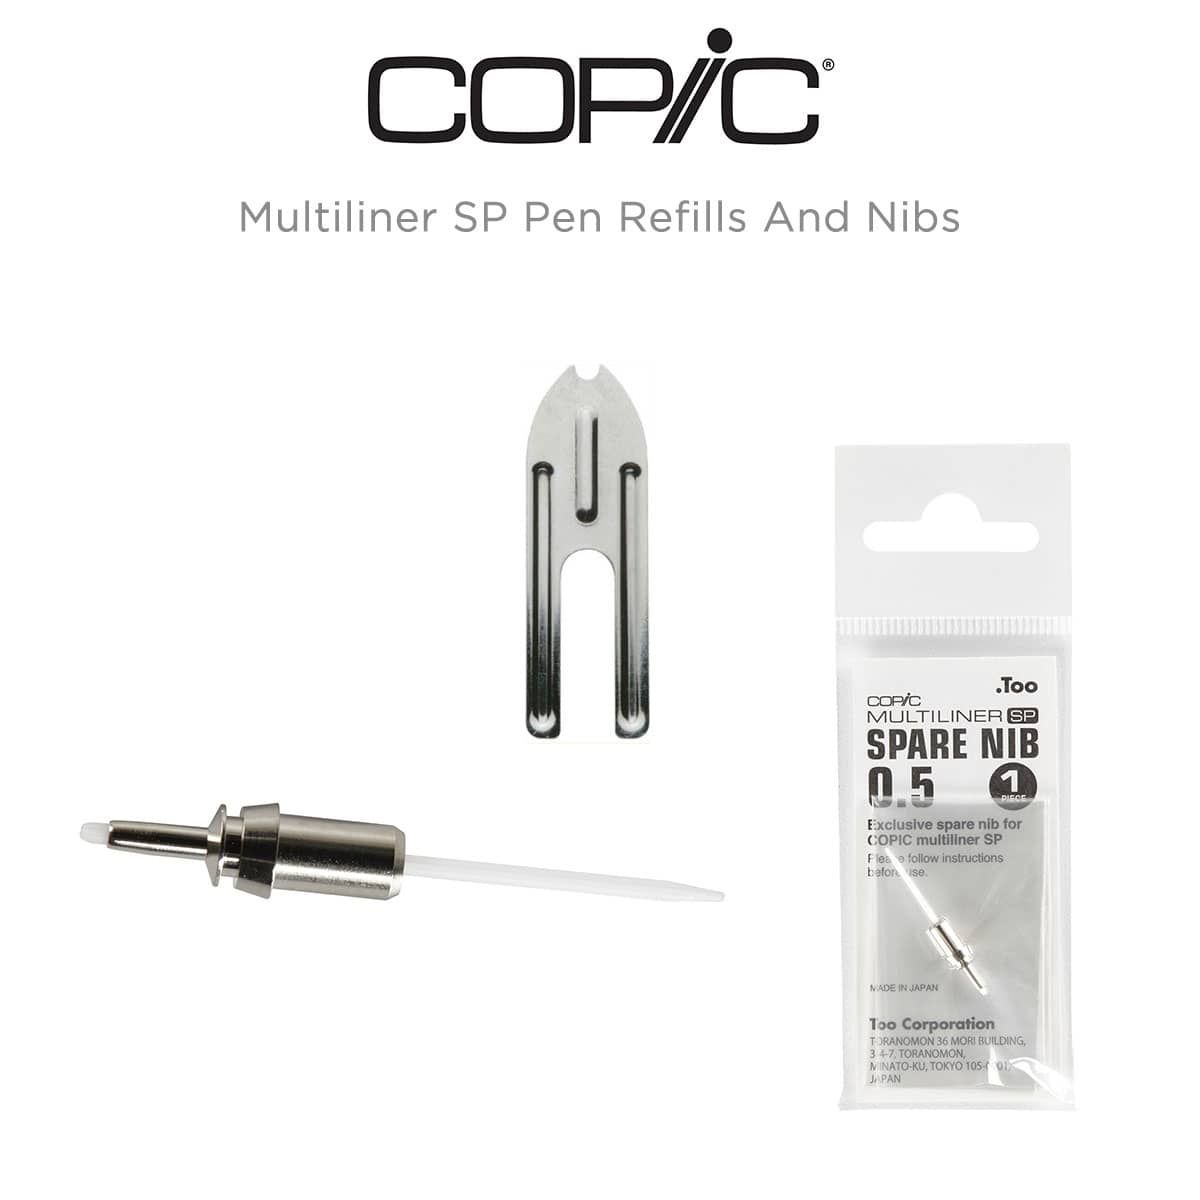 s and accessories SELECT NIB SIZE Copic Multiliner SP Replacement Nib 